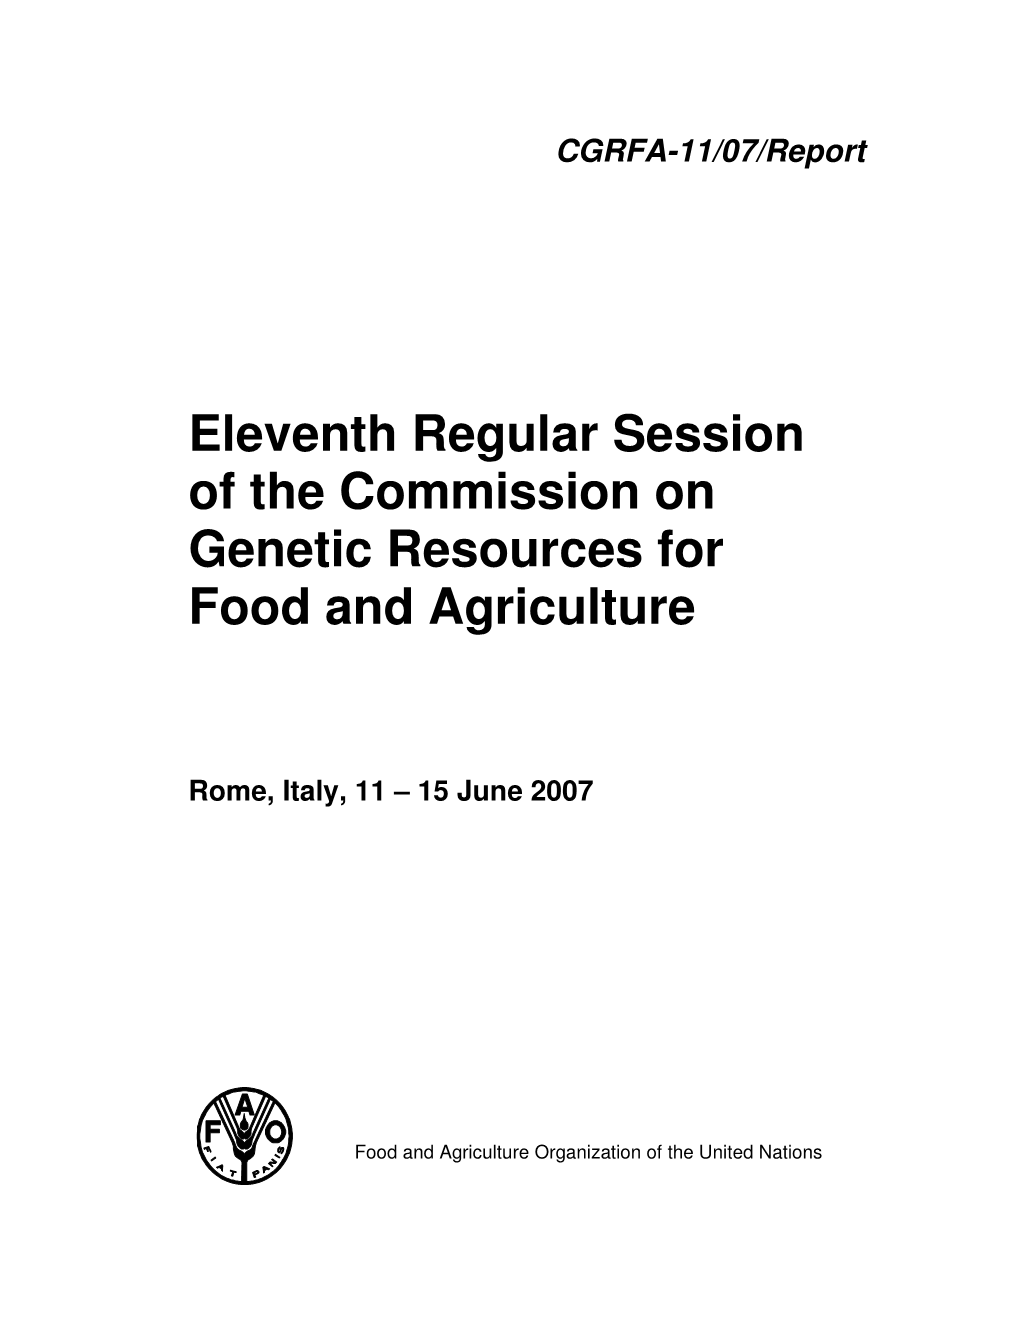 Eleventh Regular Session of the Commission on Genetic Resources for Food and Agriculture